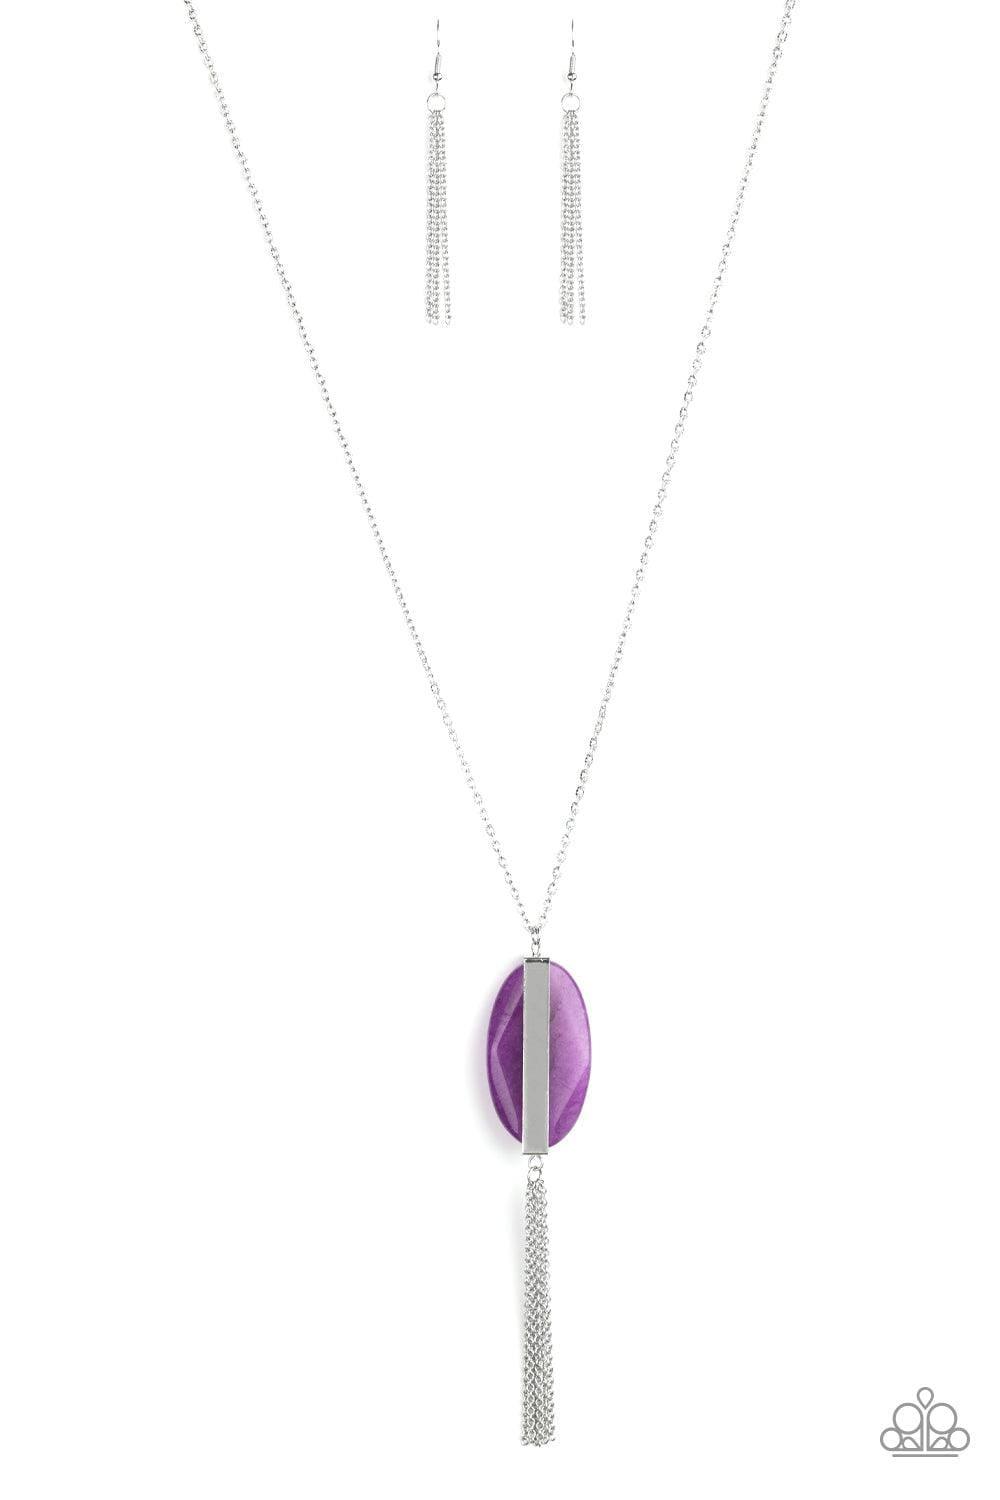 Paparazzi Accessories - Tranquility Trend - Purple Necklace - Bling by JessieK